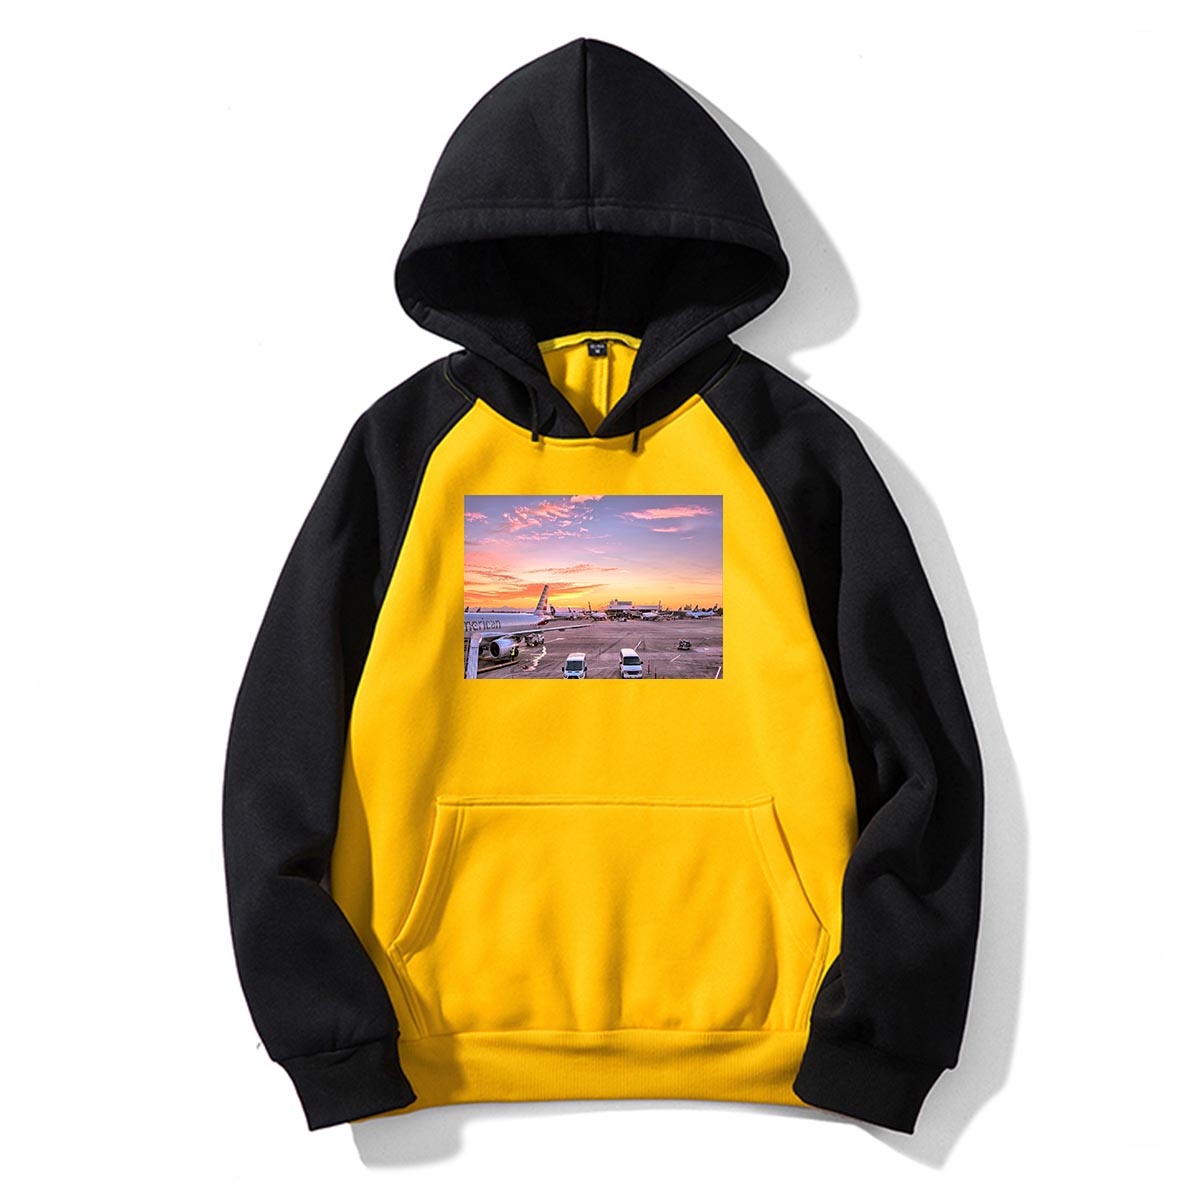 Airport Photo During Sunset Designed Colourful Hoodies